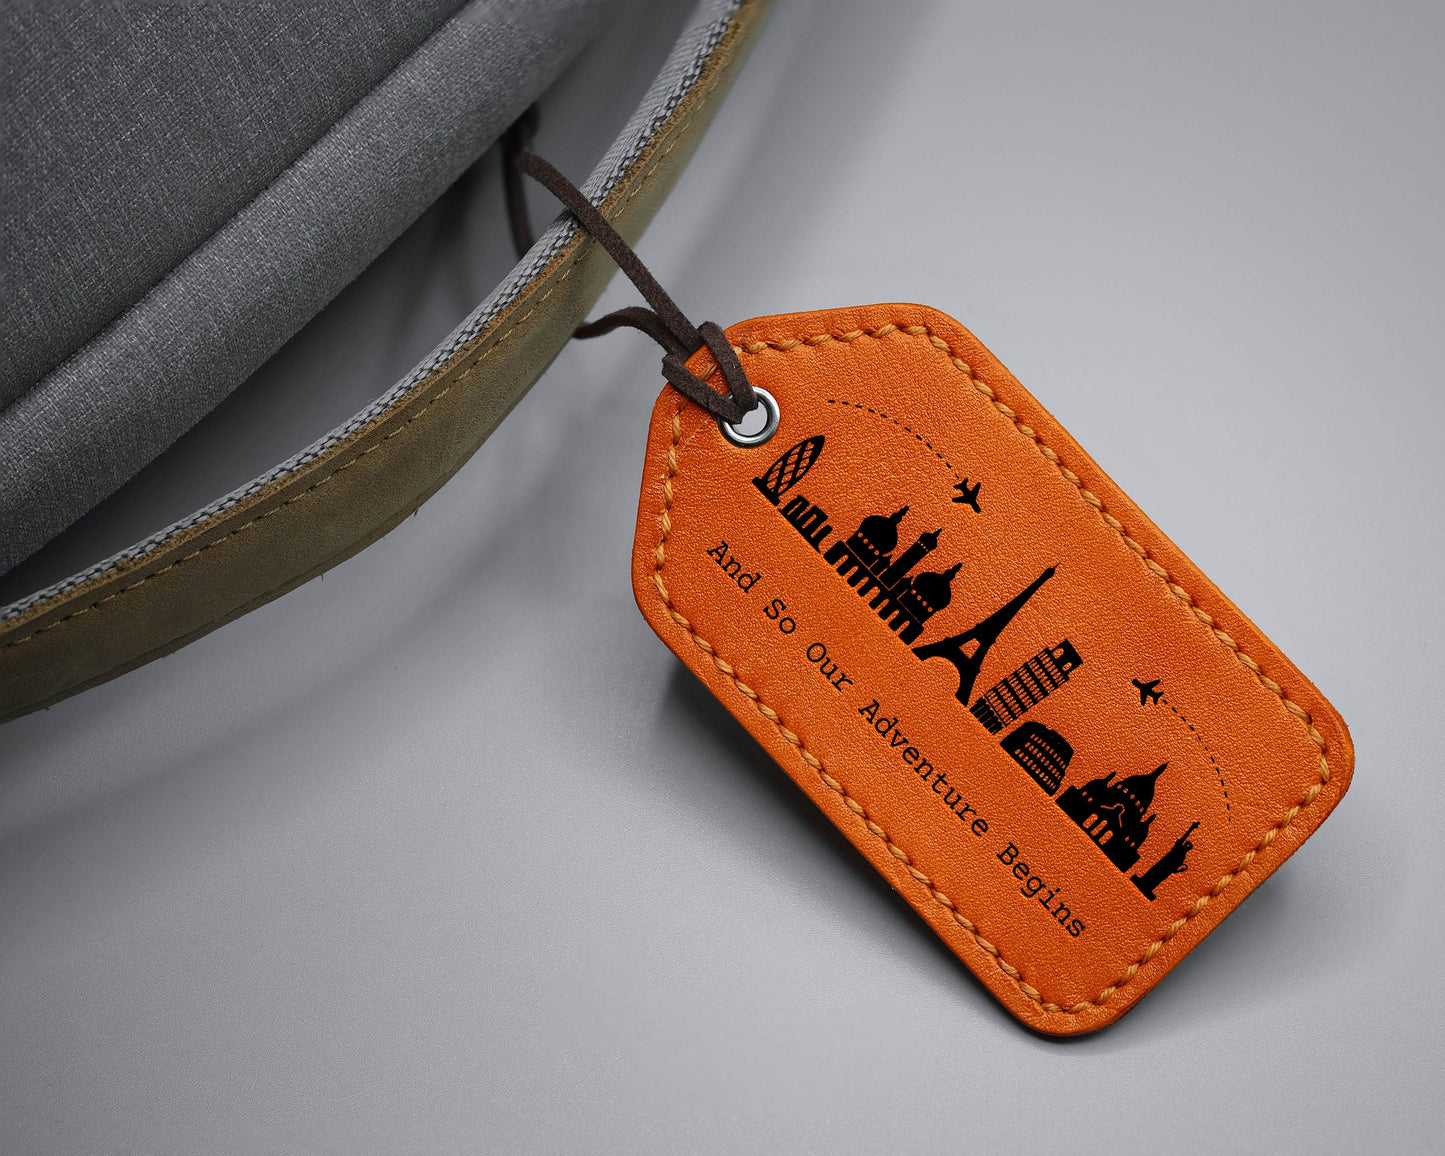 Leather Luggage Tag - Anthony Bourdain's Quote